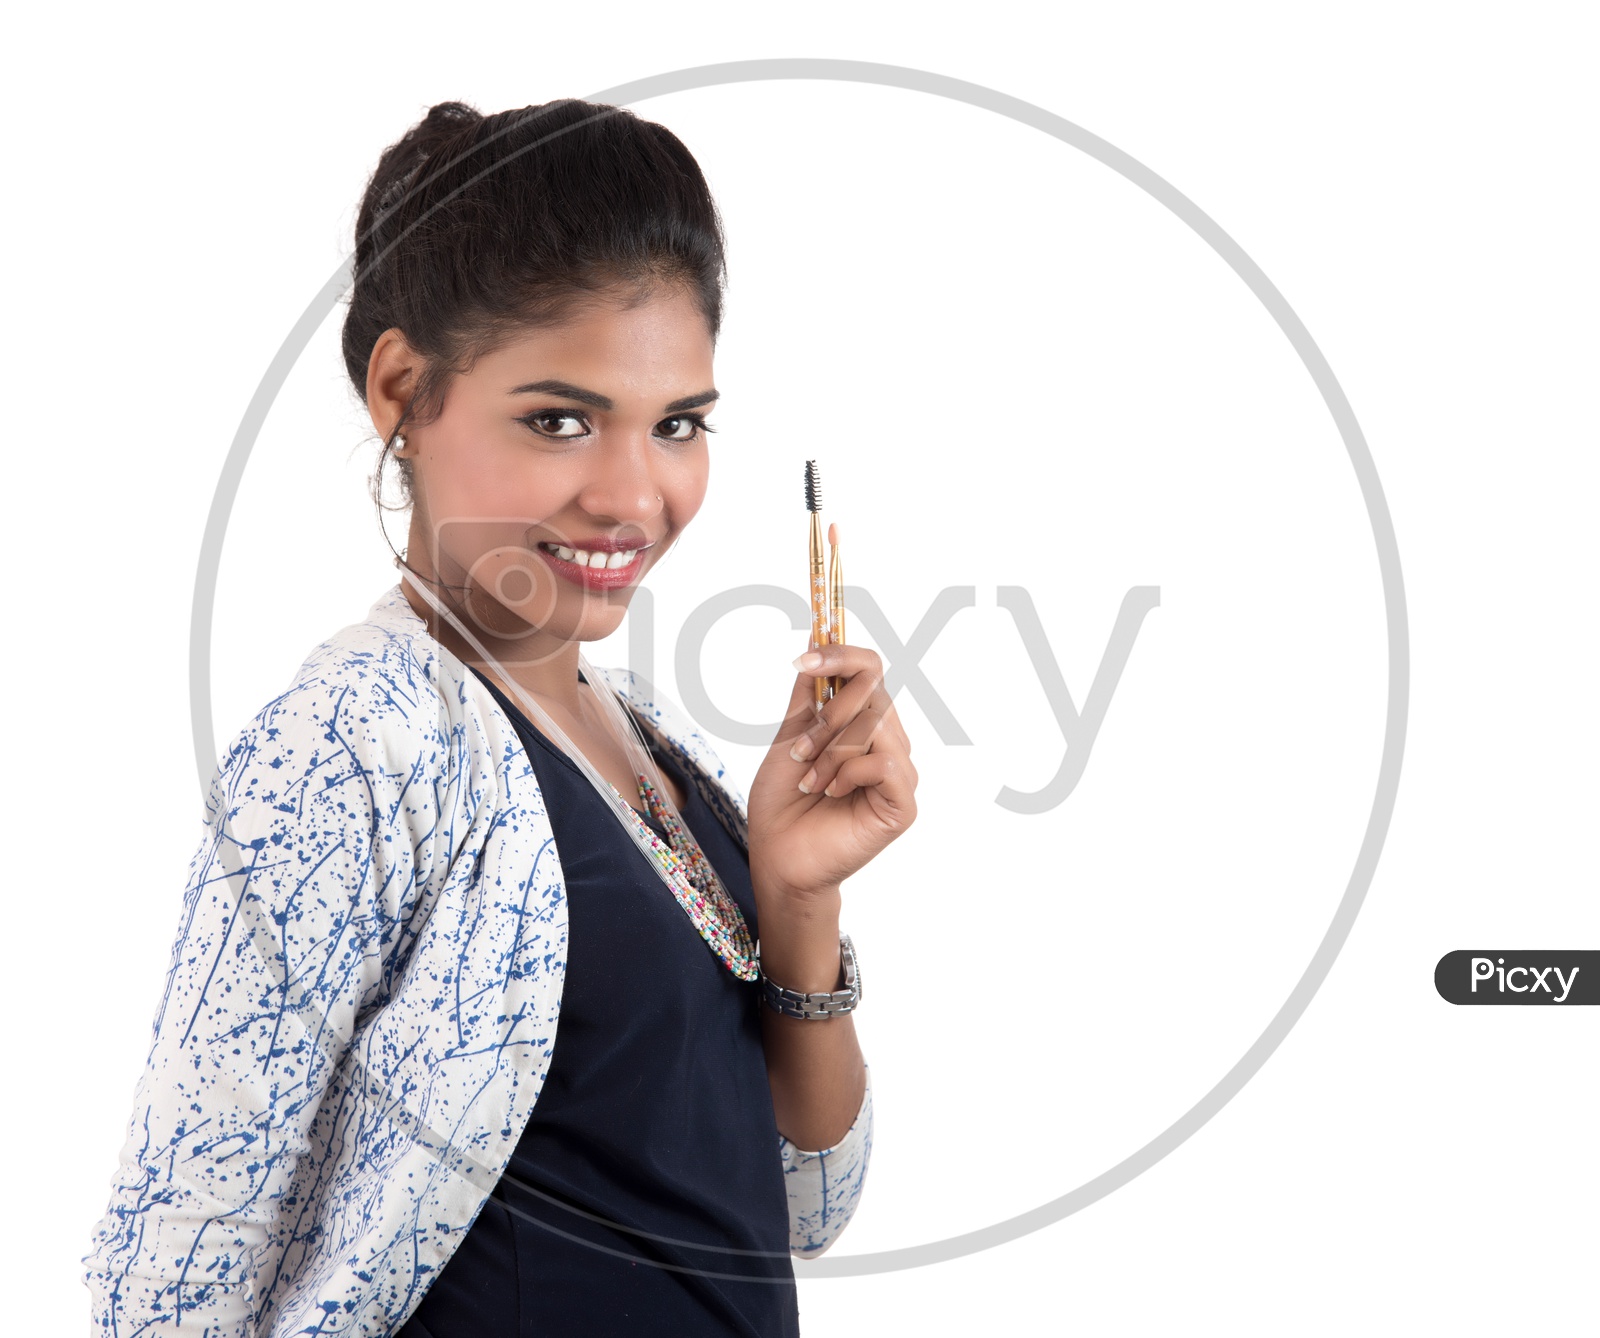 Young Indian Girl Enjoying With Makeup Brushes on an Isolated White Background